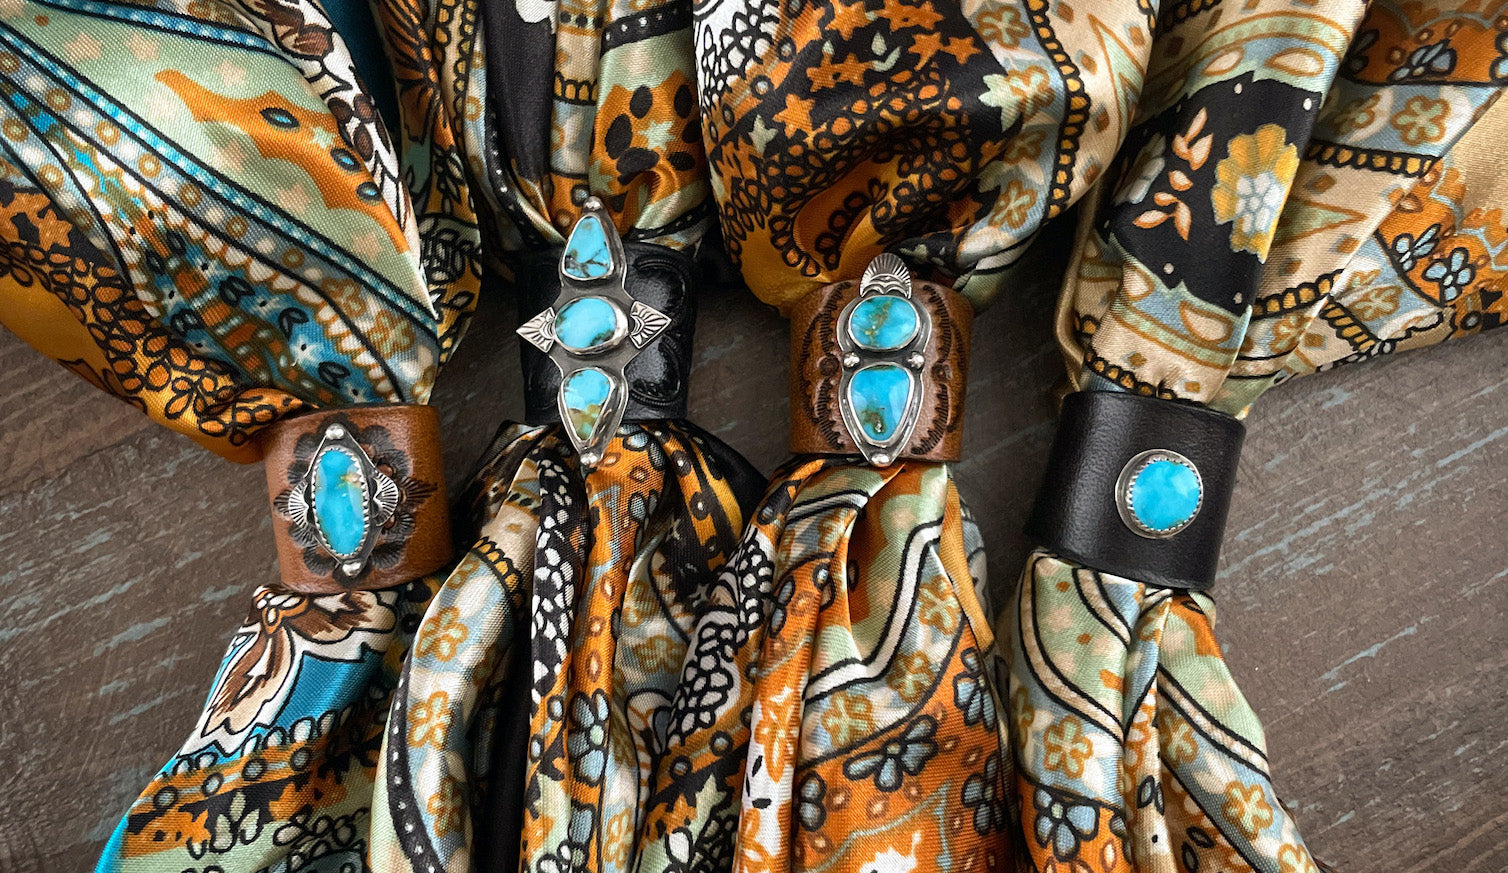 Four turquoise and silver bandana slides set on brown or black leather wrapped around brightly colored satin bandanas featuring orange, light green, blue, and black floral designs.